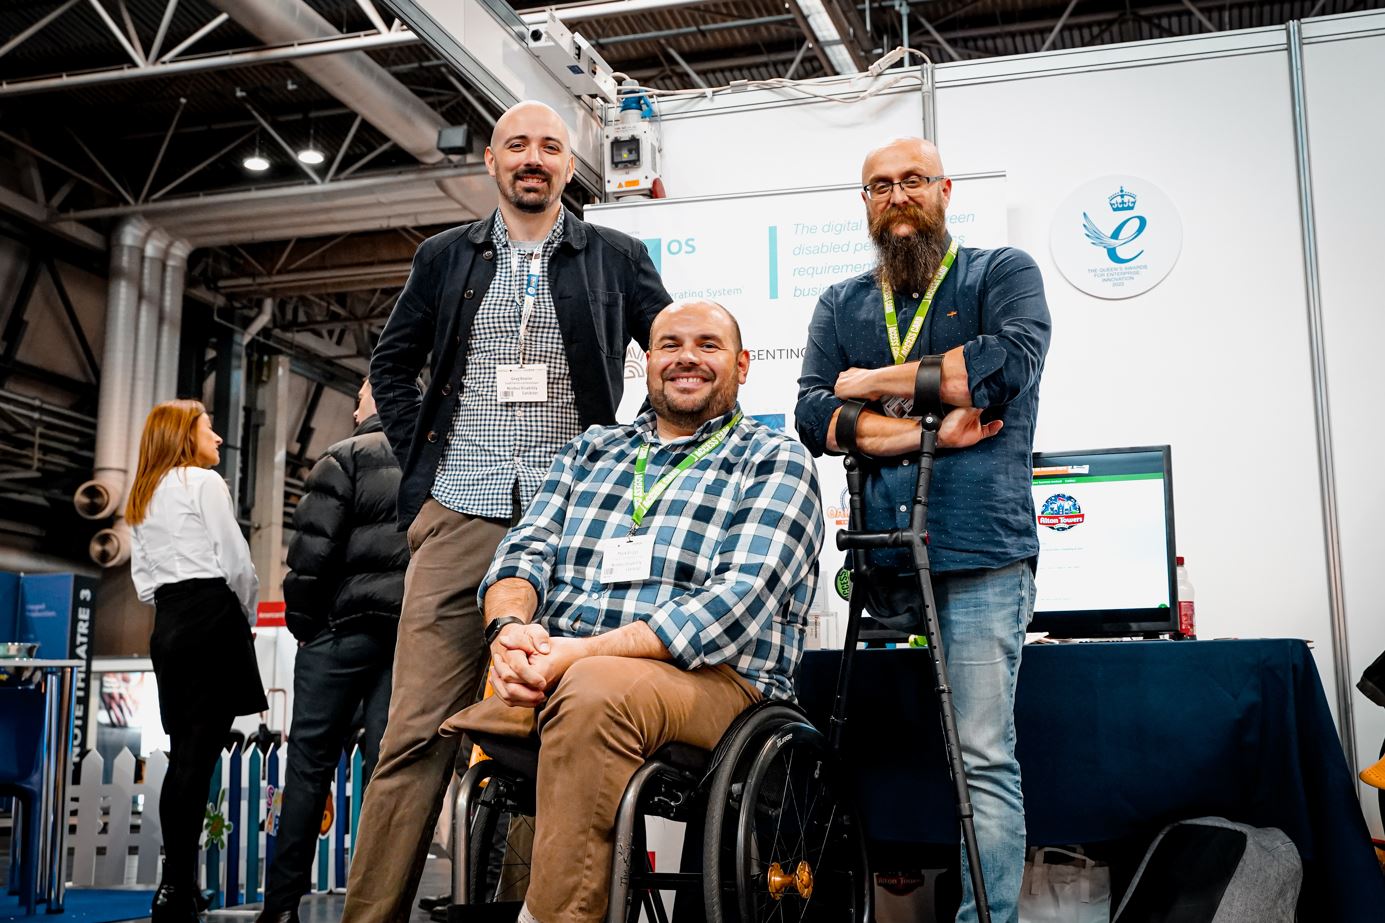 Mark with colleagues Martin and Greg at a conference stand. All 3 are white men with little hair and beards, dressed casually and smiling. Mark is a wheelchair user, whilst Martin is using crutches.